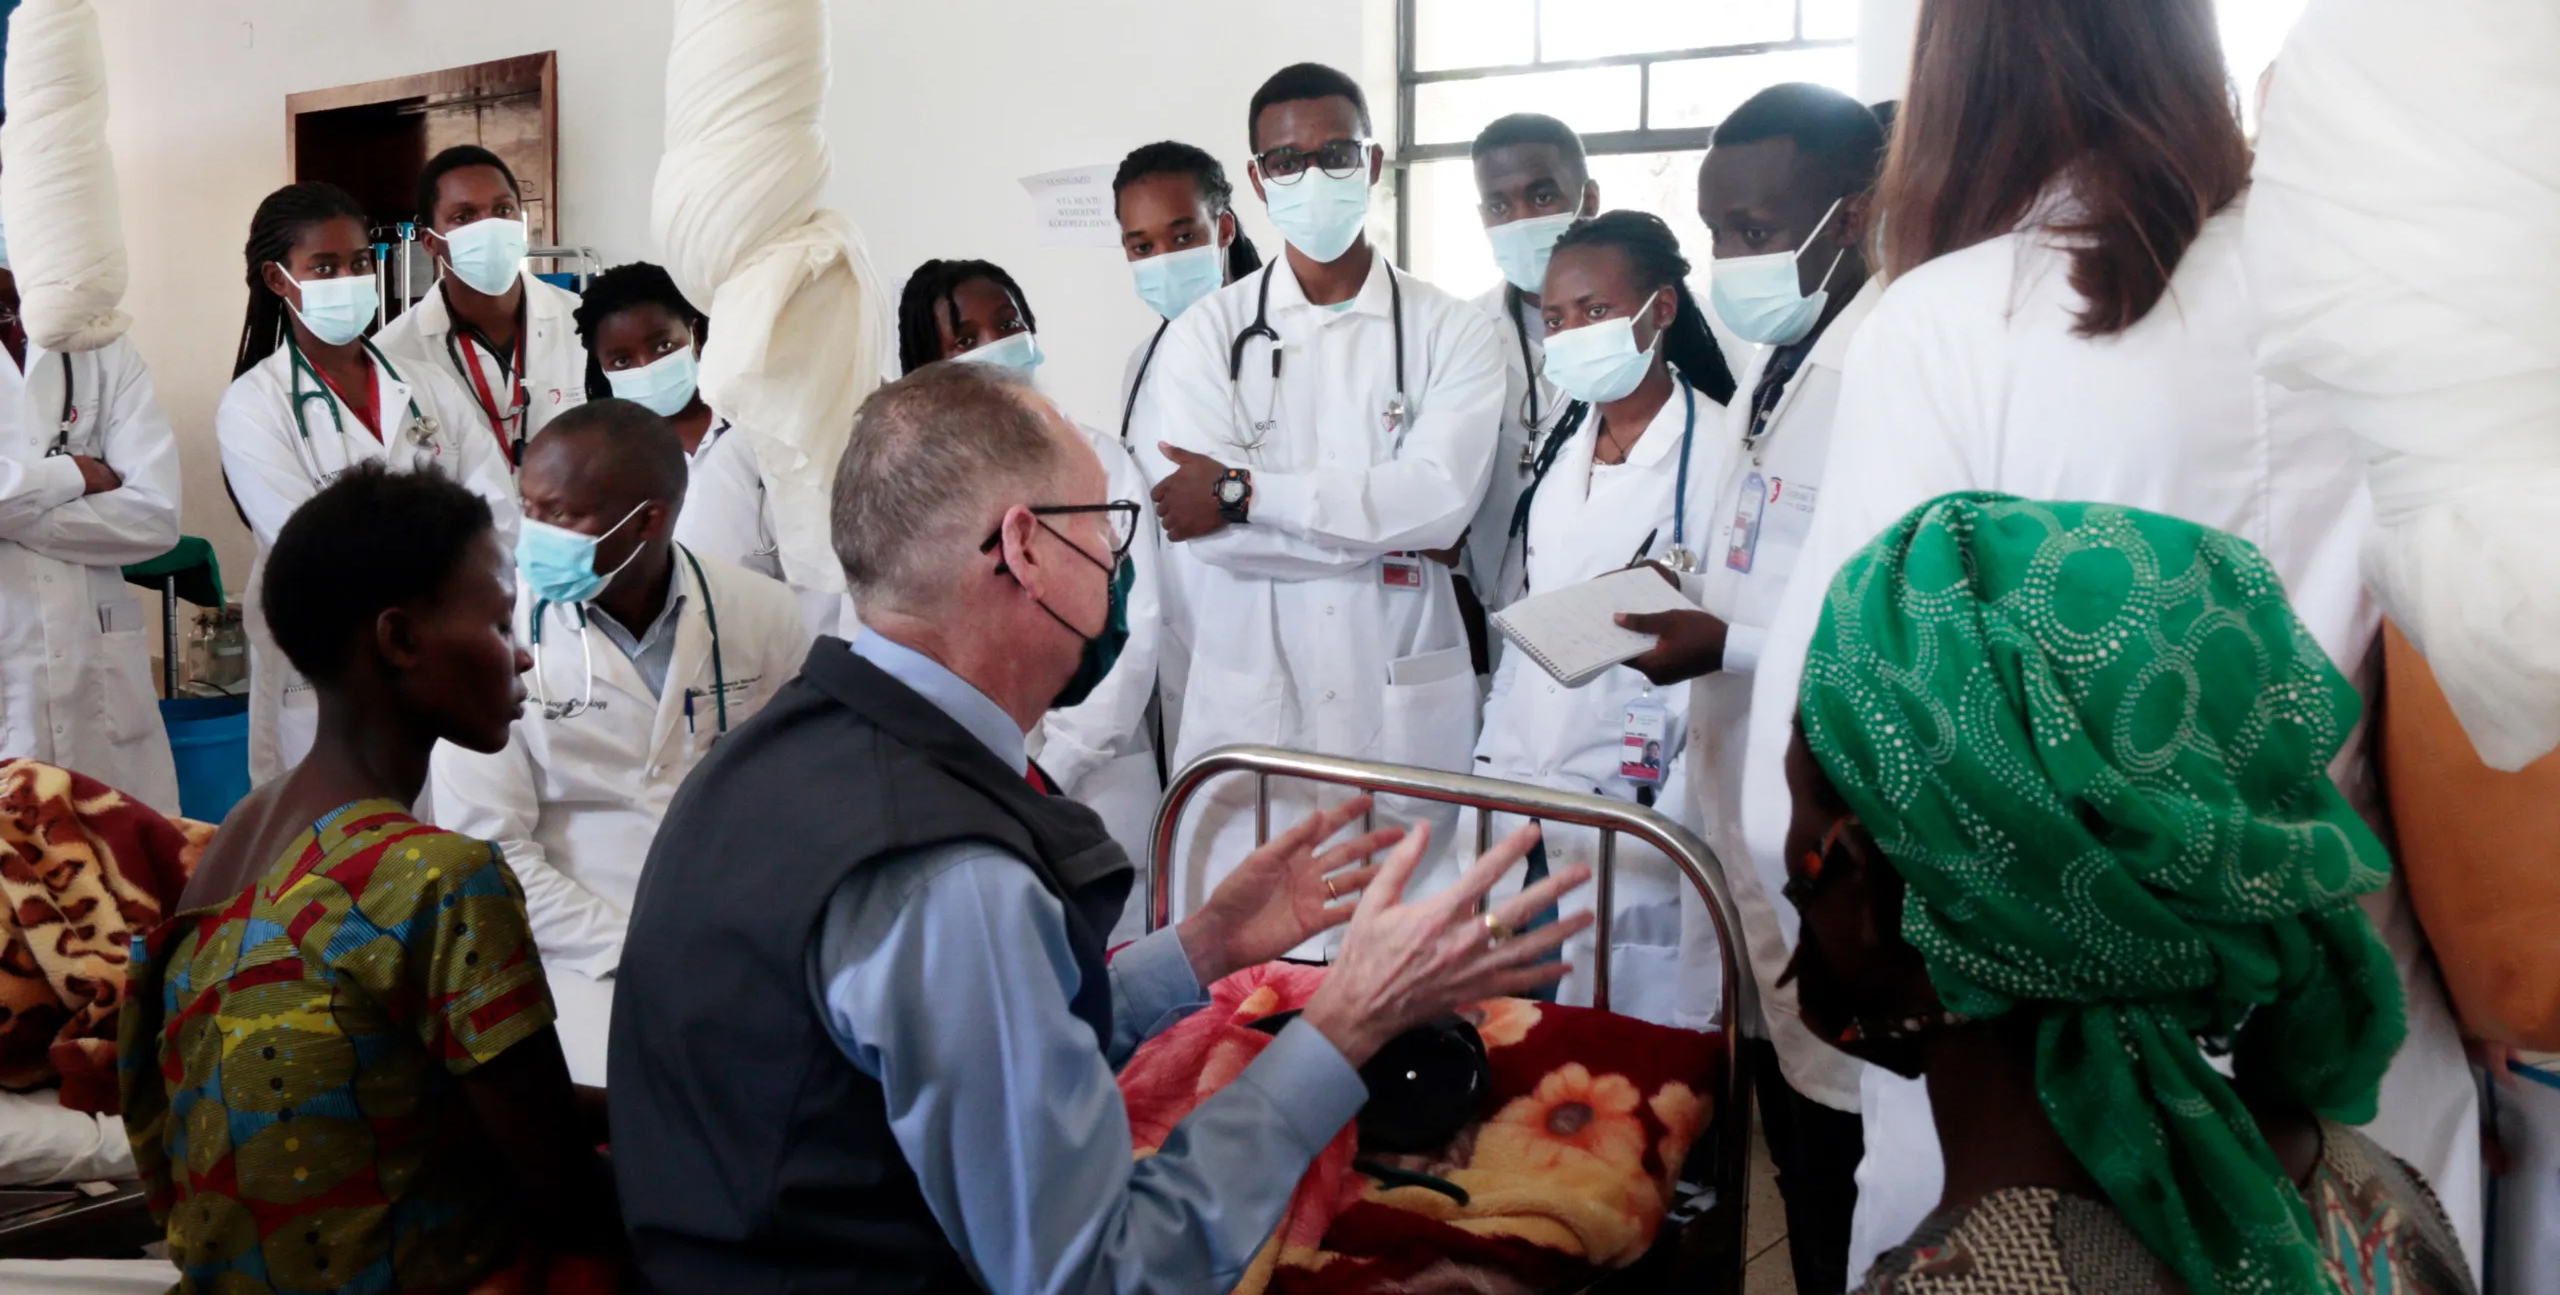 A line of women and men wearing white lab coats, medical masks, and stethoscopes stand facing three people, including Paul Farmer, sitting on hospital beds. 